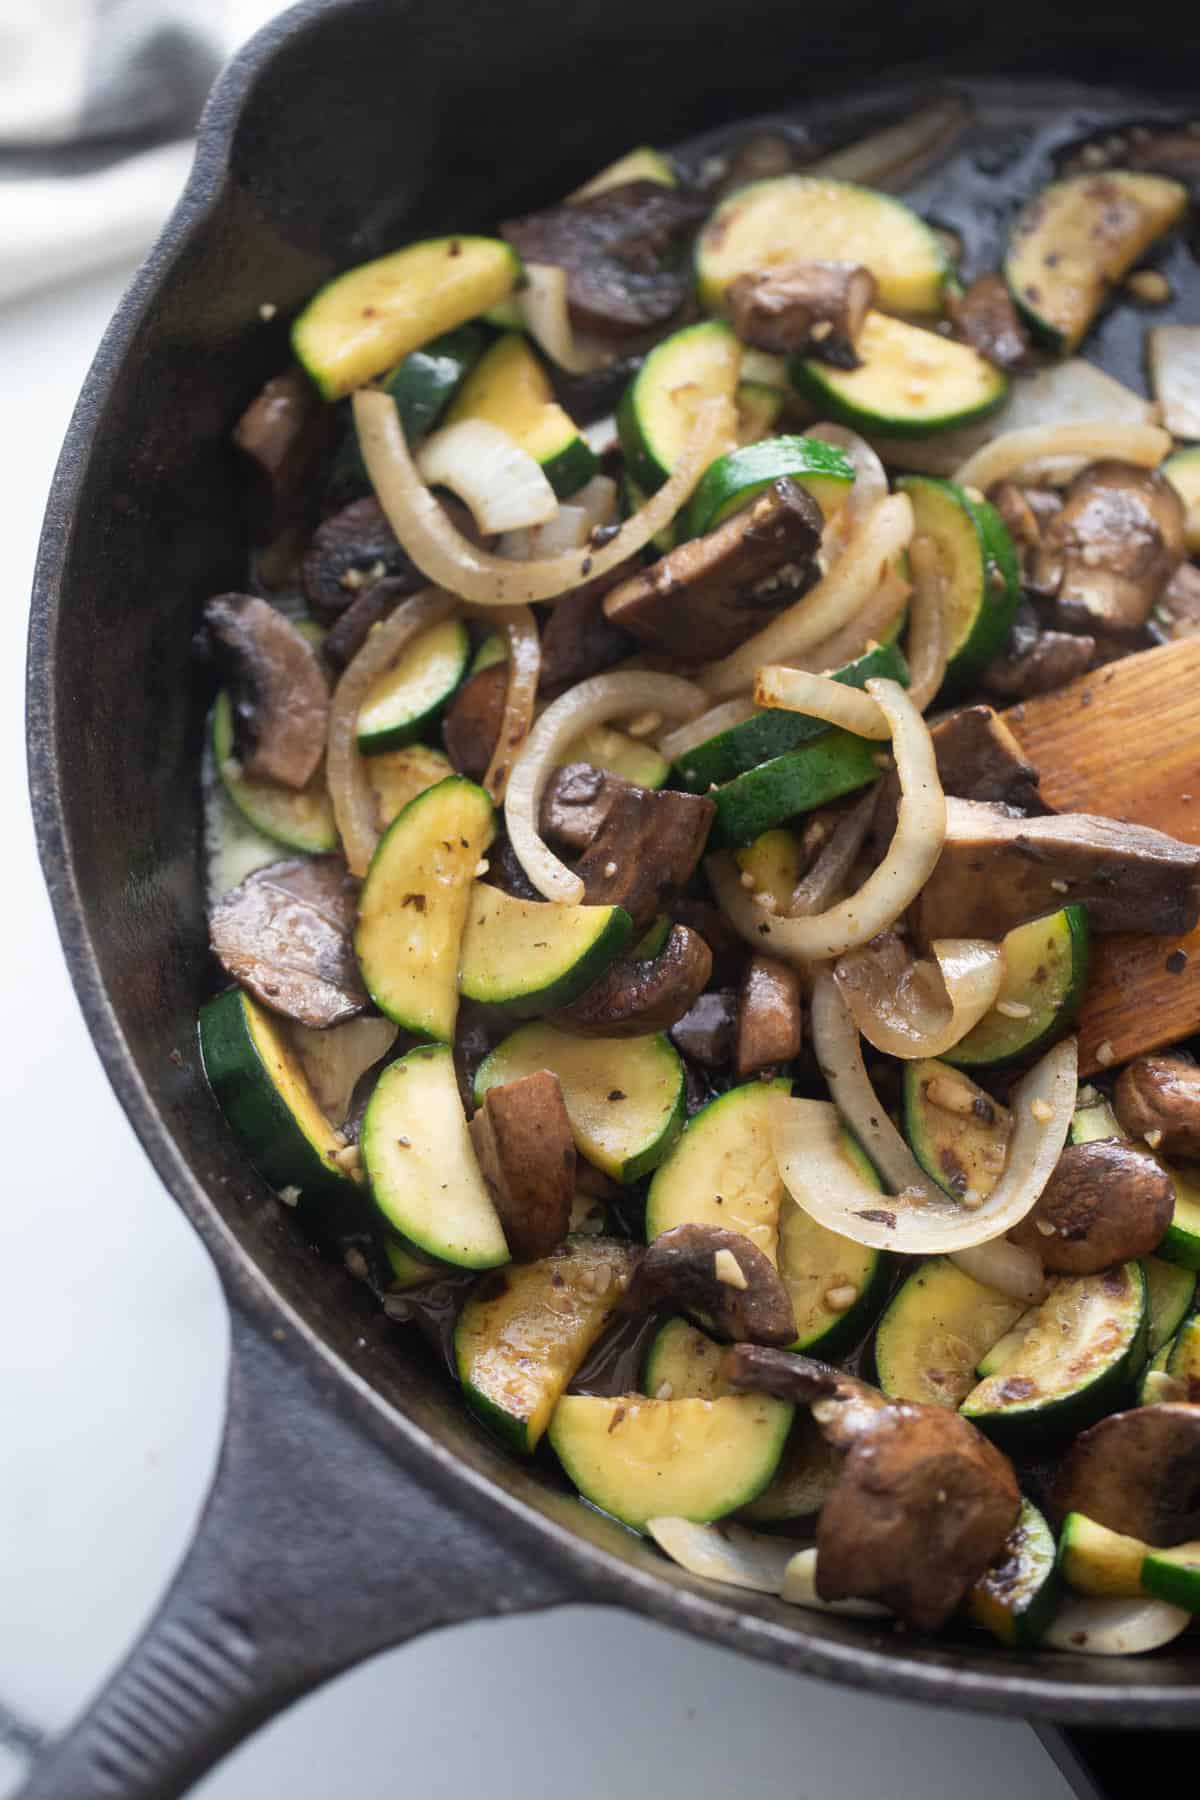 Sauteed zucchini, mushrooms, onions, and garlic in a cast iron skillet.